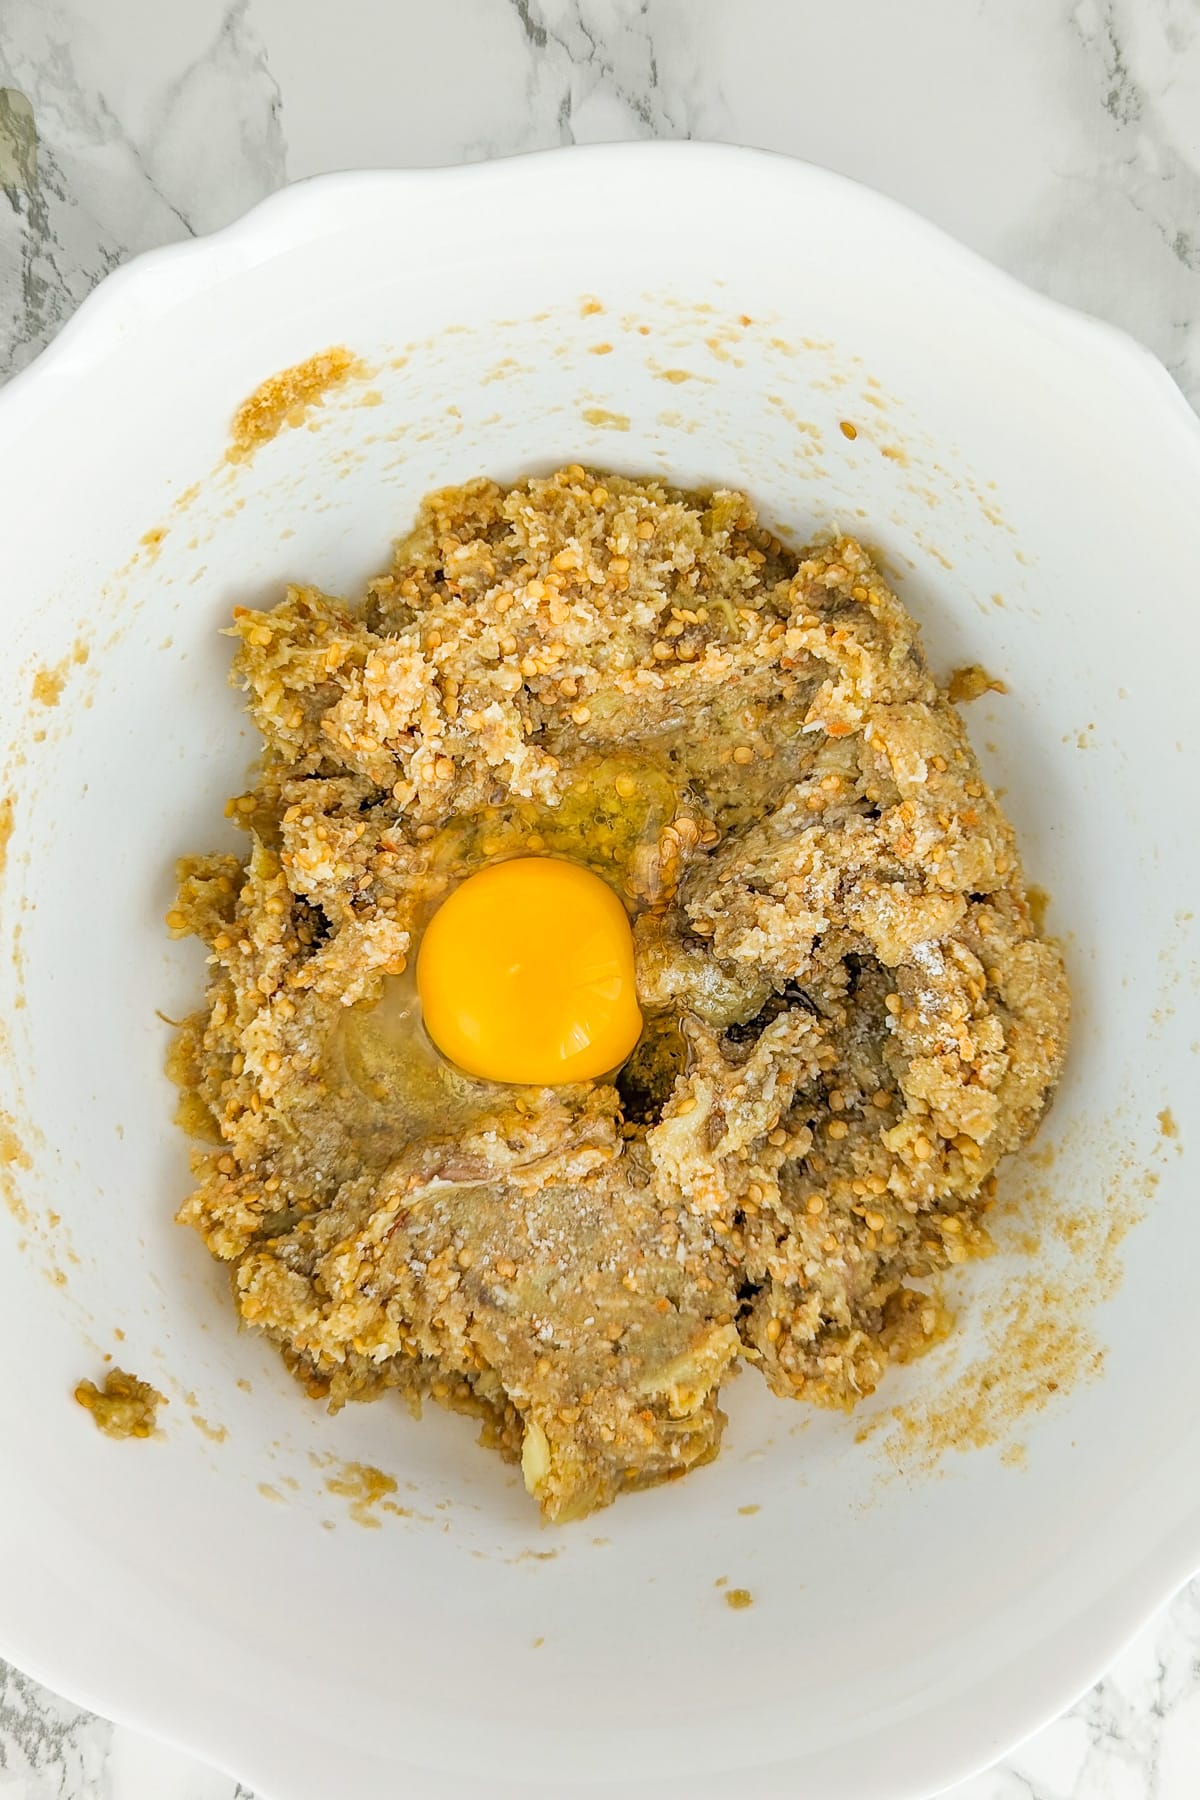 Top view of a white large bowl with eggplant mixture covered with a raw egg.